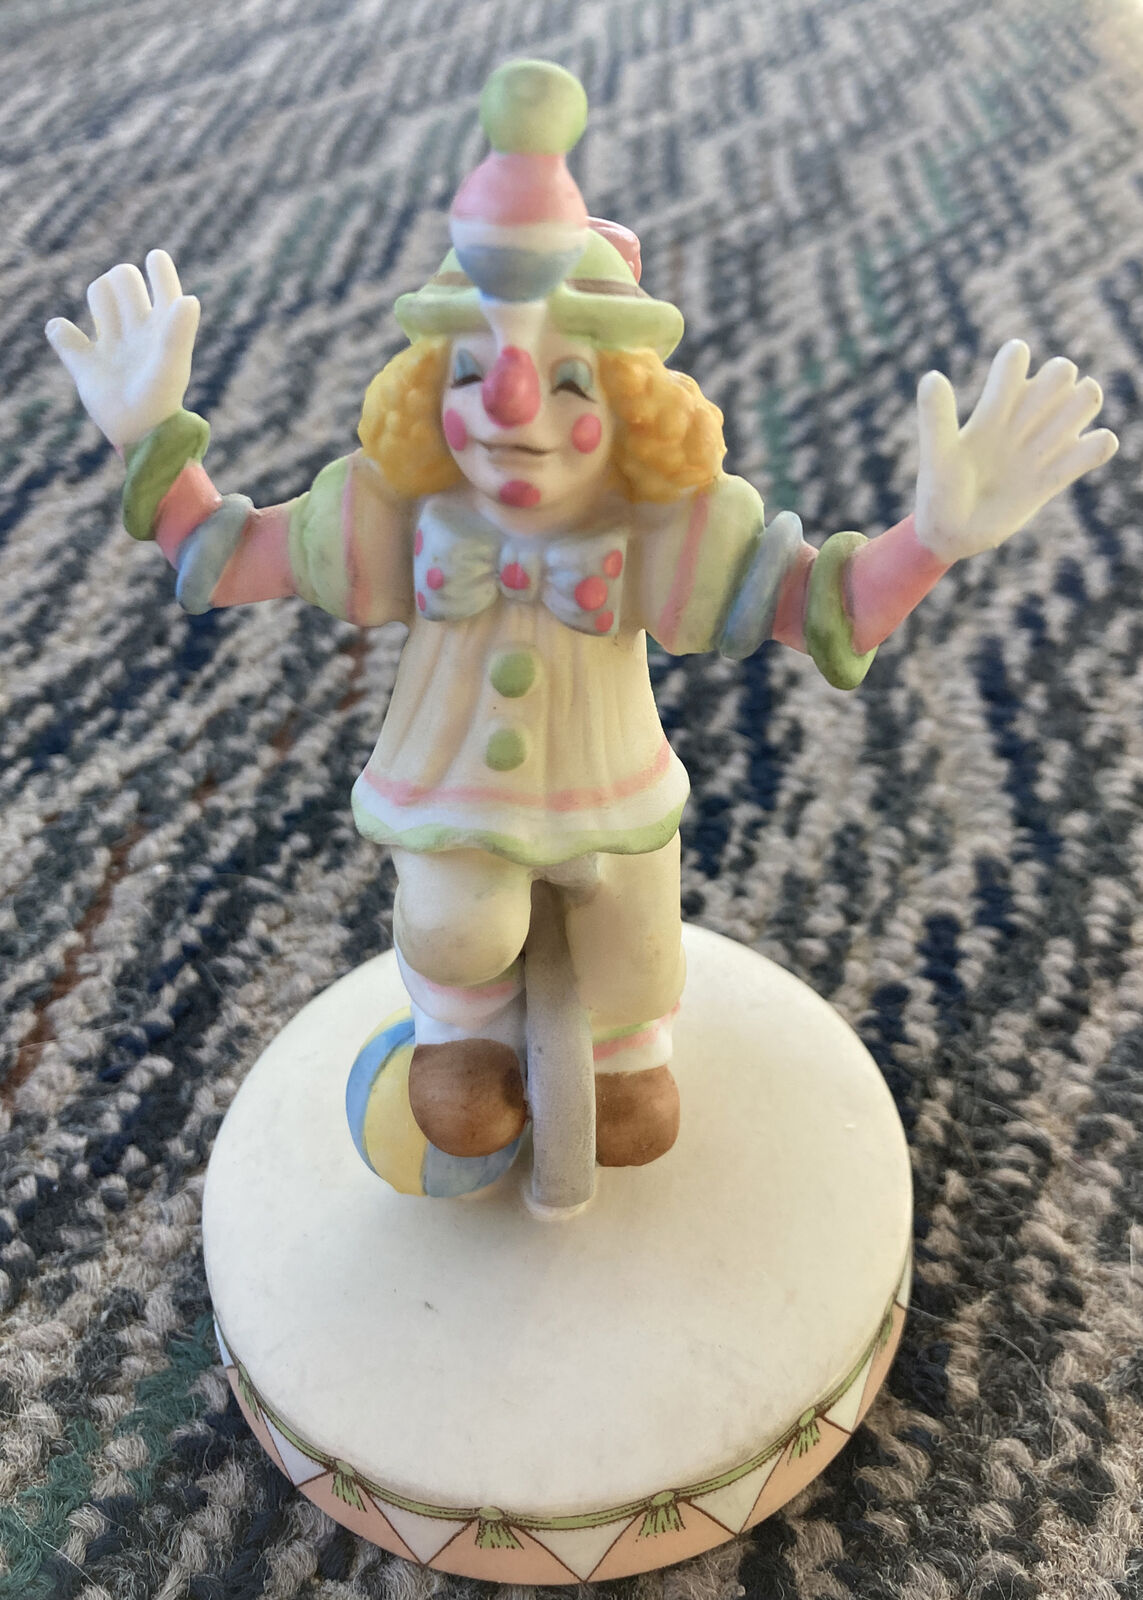 VINTAGE 1983 CIRCUS ROYALE WALLACE BERRIE & CO MASTER FIGURINE 9605